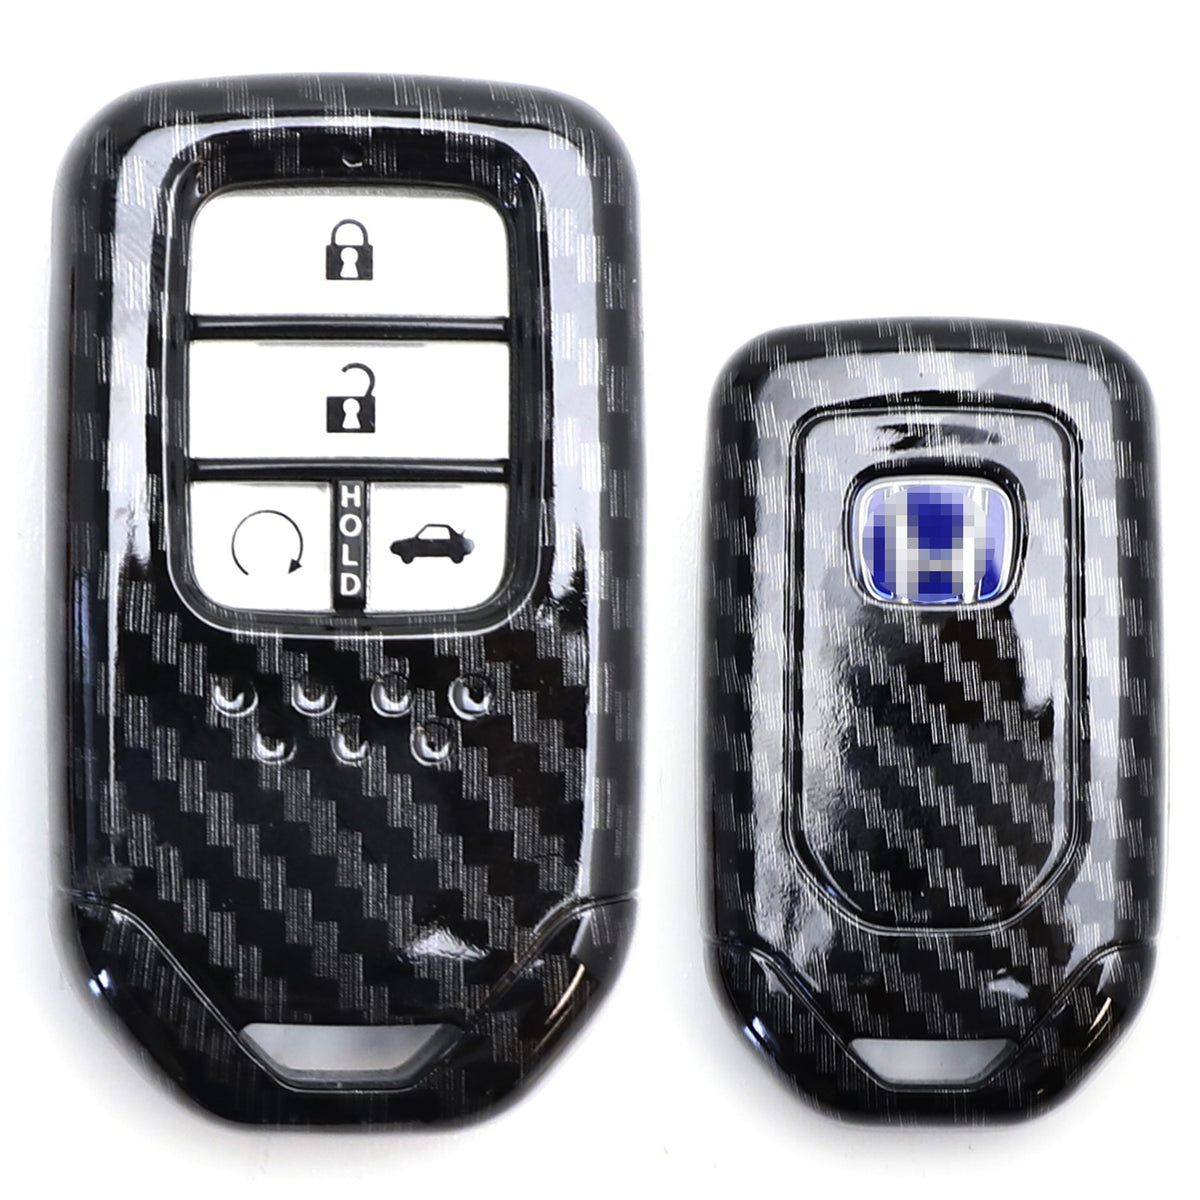 White Hard Remote Key Cover for Mercedes GLK Class PROTECTOR Shell